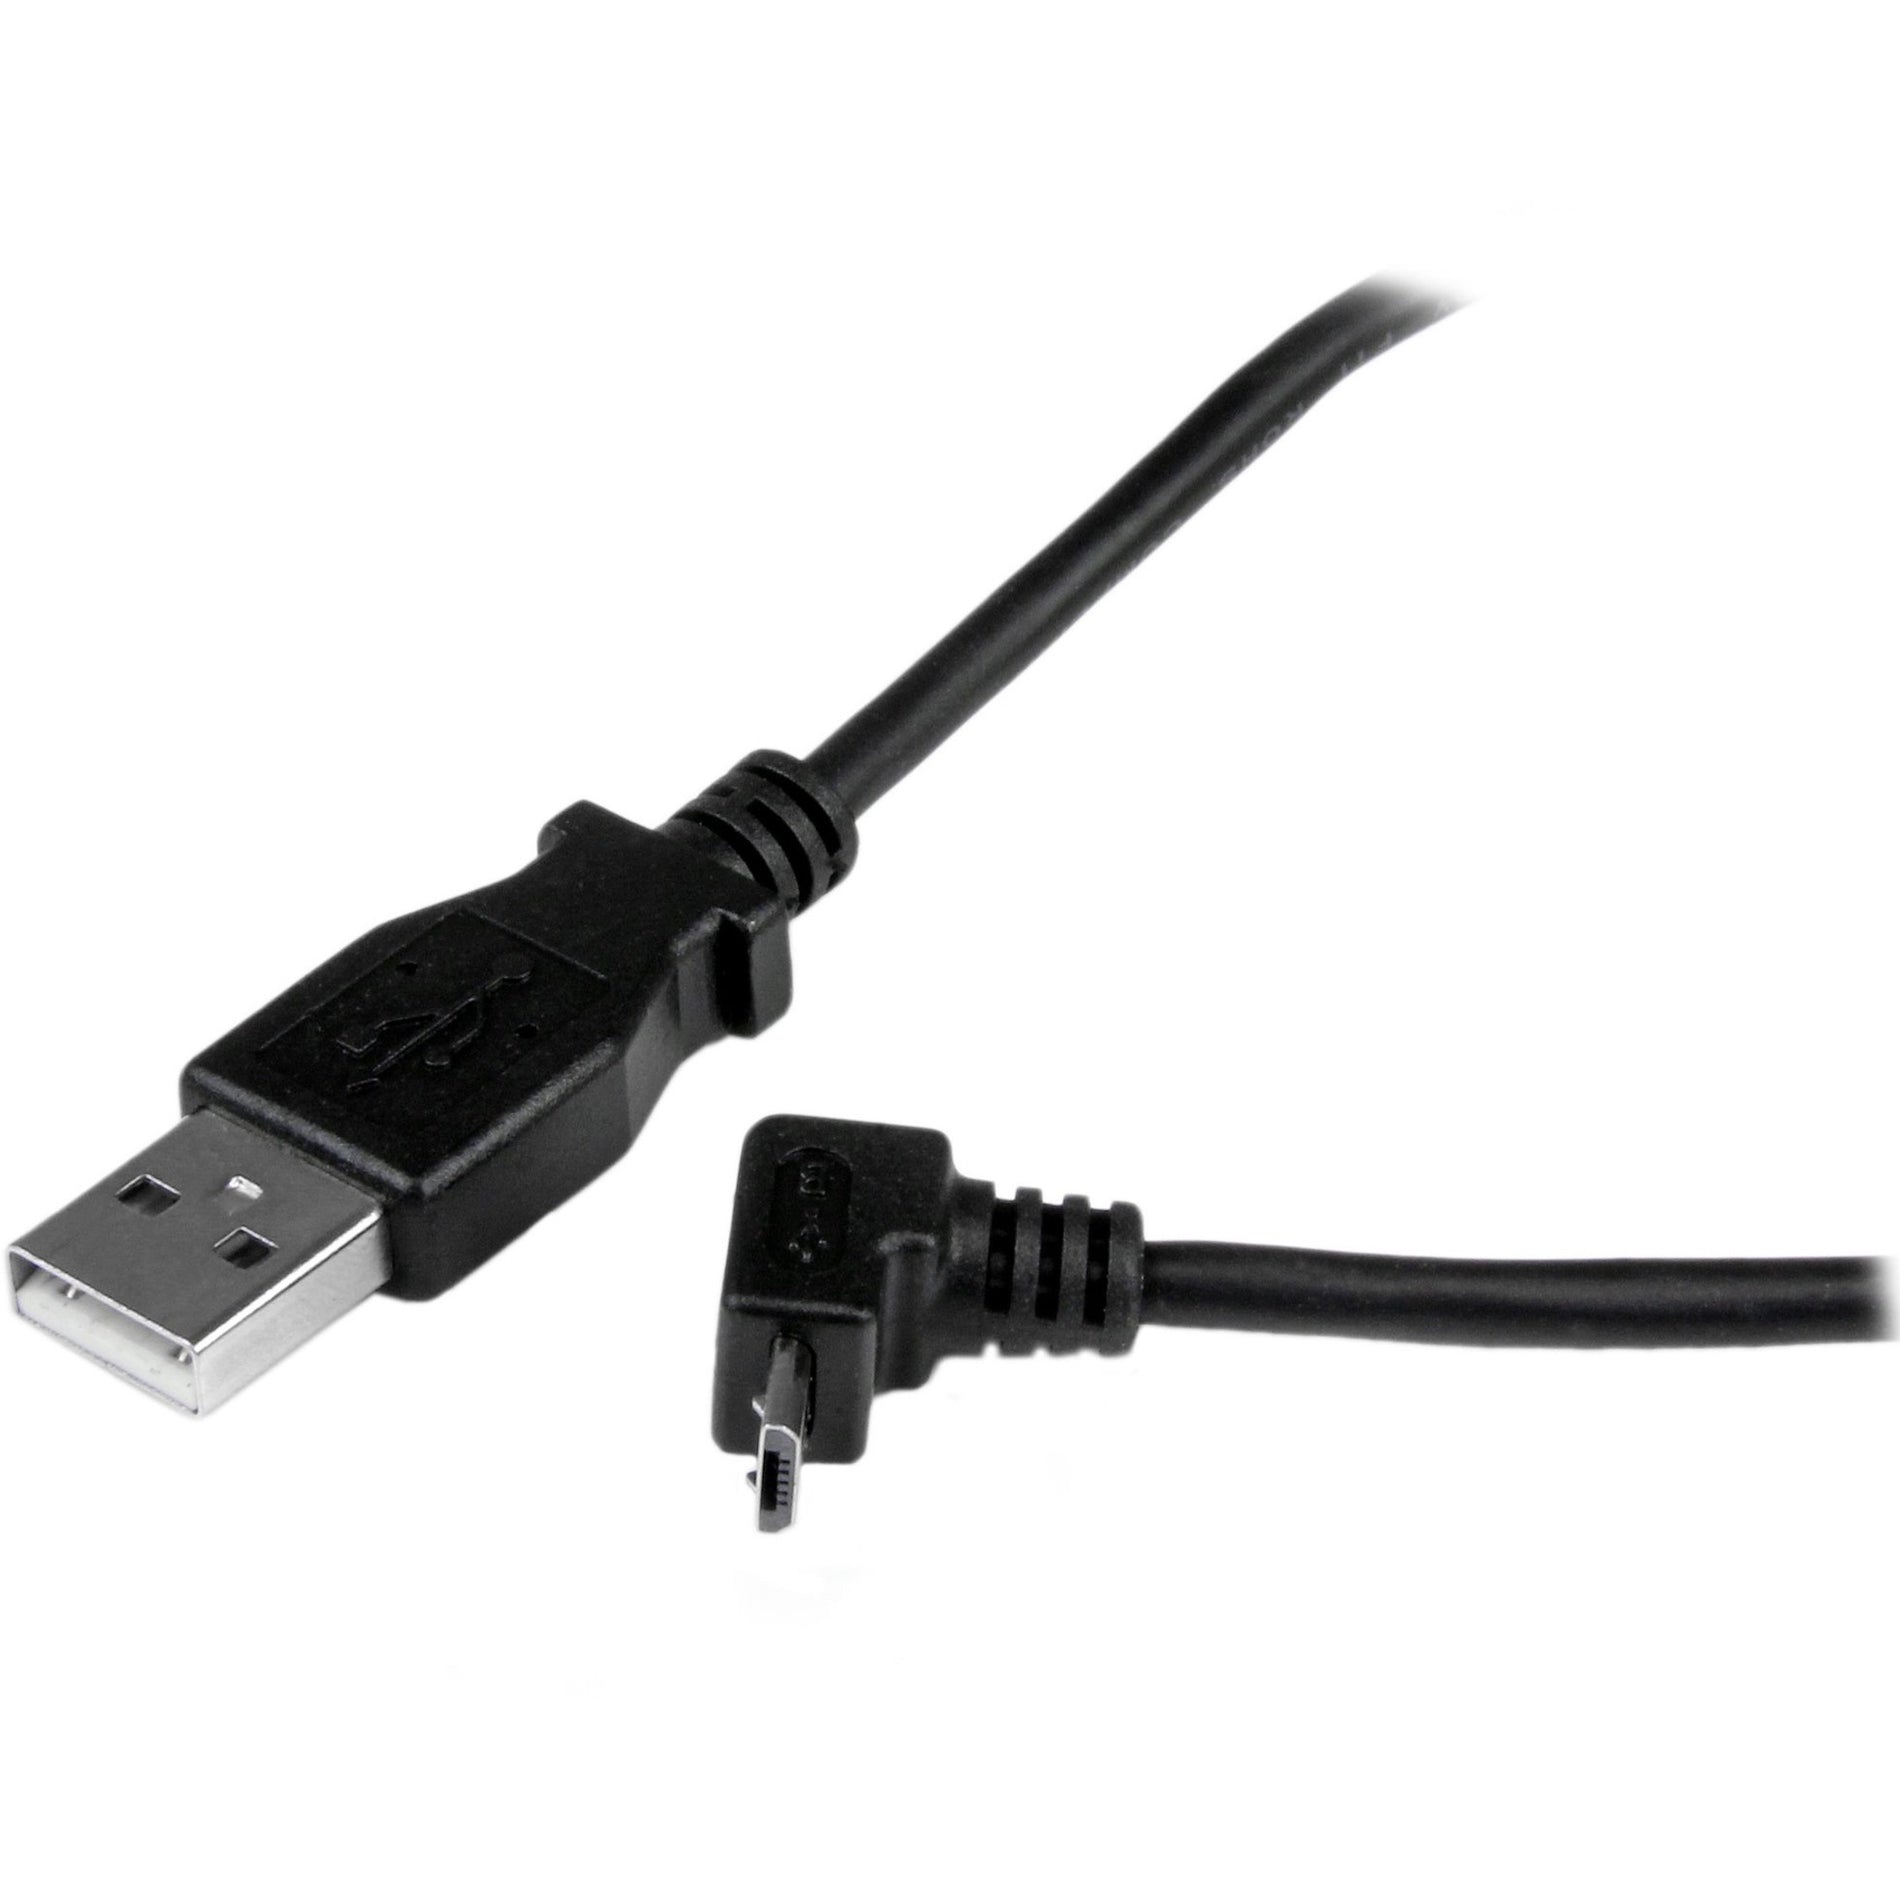 StarTech.com USBAUB2MU 2m Micro USB Cable - A to Up Angle Micro B, Fast Charging, Strain Relief, Black